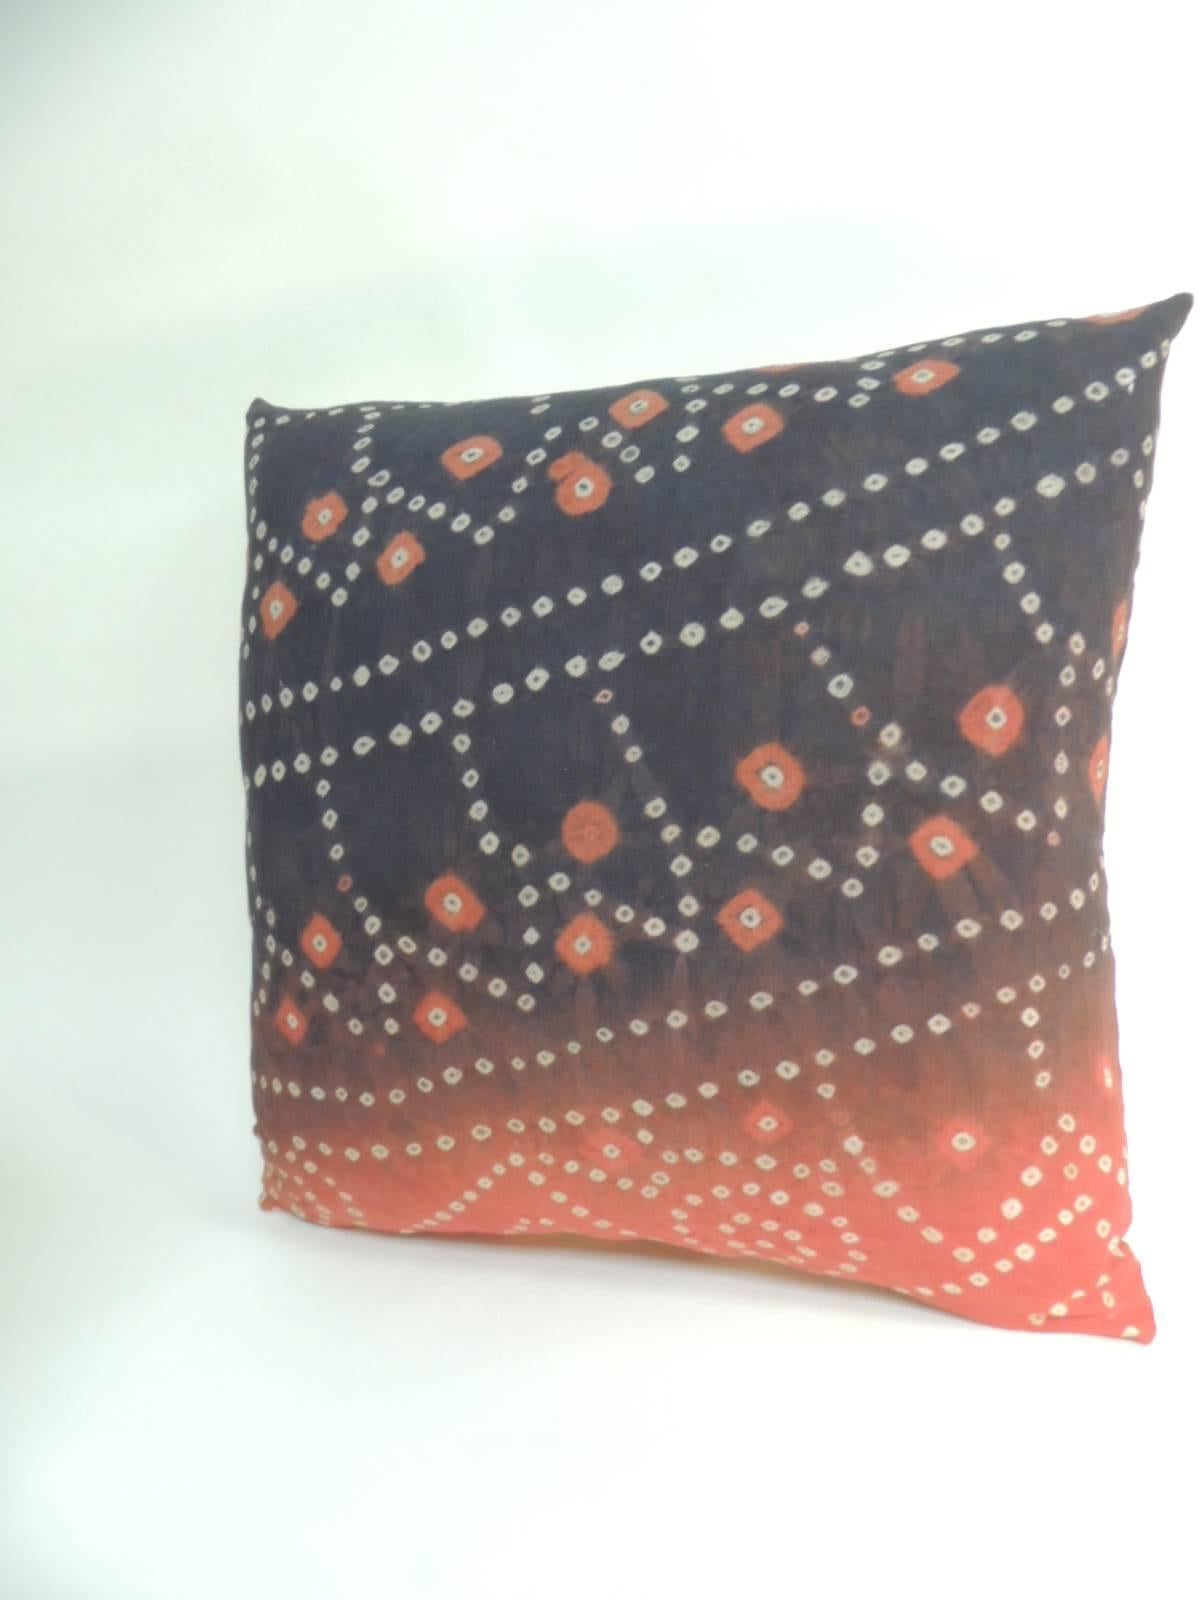 Pair of vintage textile Asian Shibori hand-dyed orange and black square decorative pillows
Orange and black square throw pillows handcrafted with an Asian Shibori hand-dyed textile with small hand-dyed details and circular patterns. Decorative